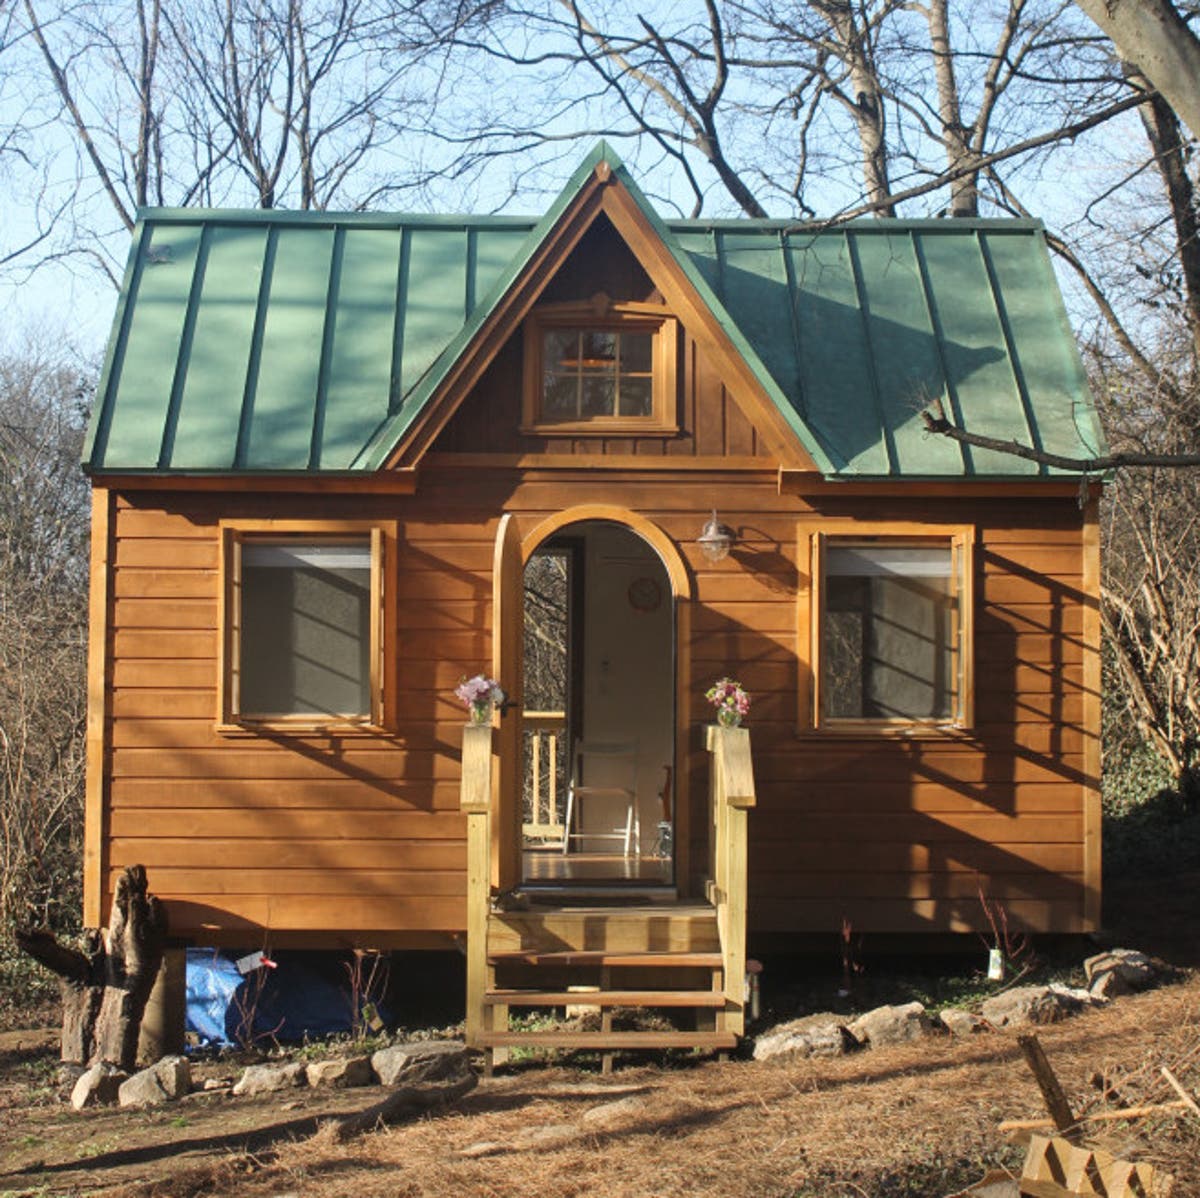 This 383 Sq Ft Tiny Home Is Now Open to Tour at Cheekwood!